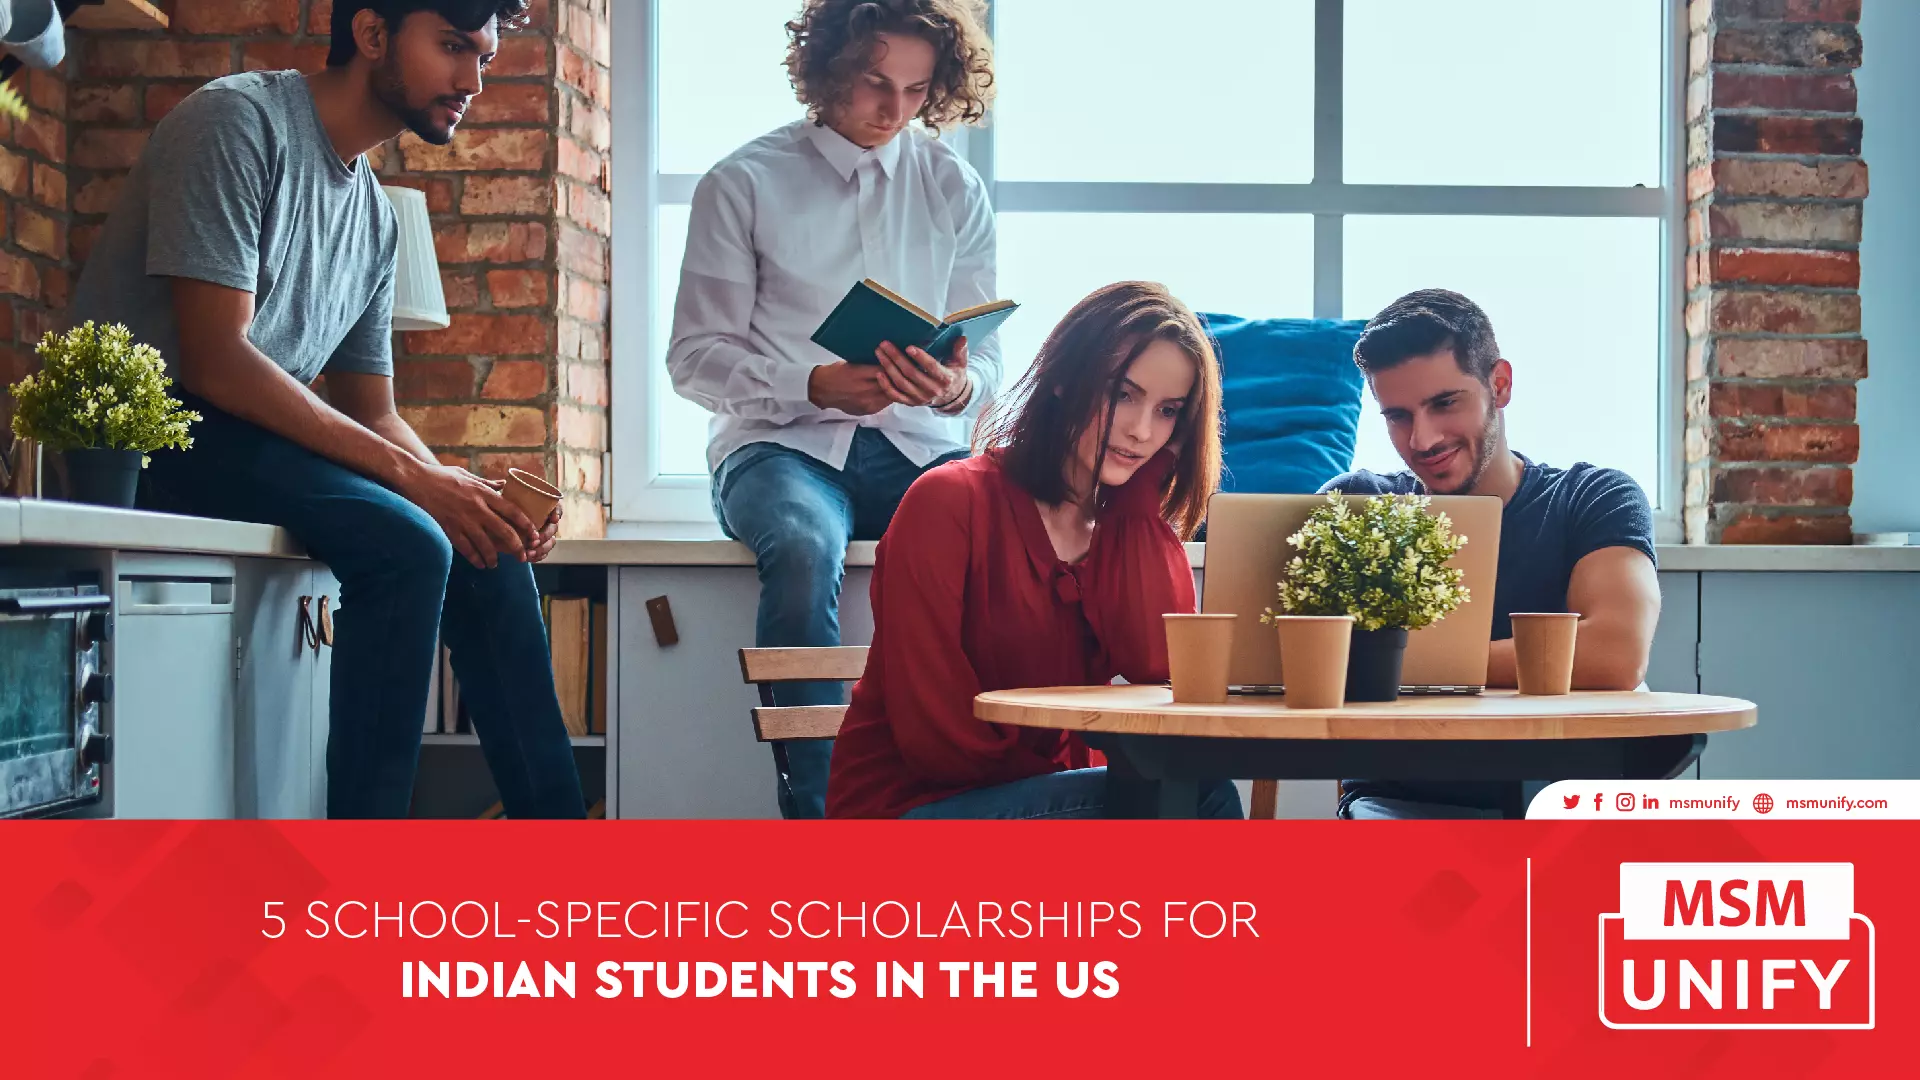 111422 MSM Unify 5 School Specific Scholarships for Indian students in the US 01